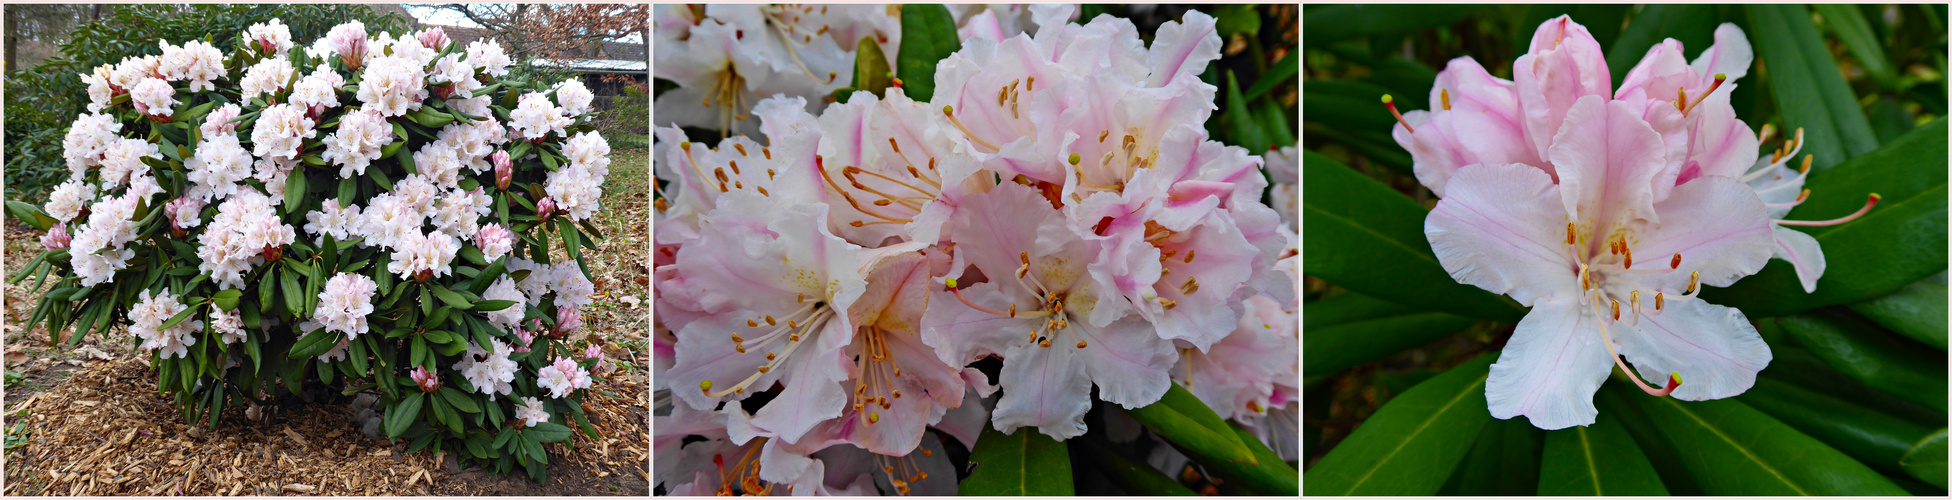 erster Rhododendron